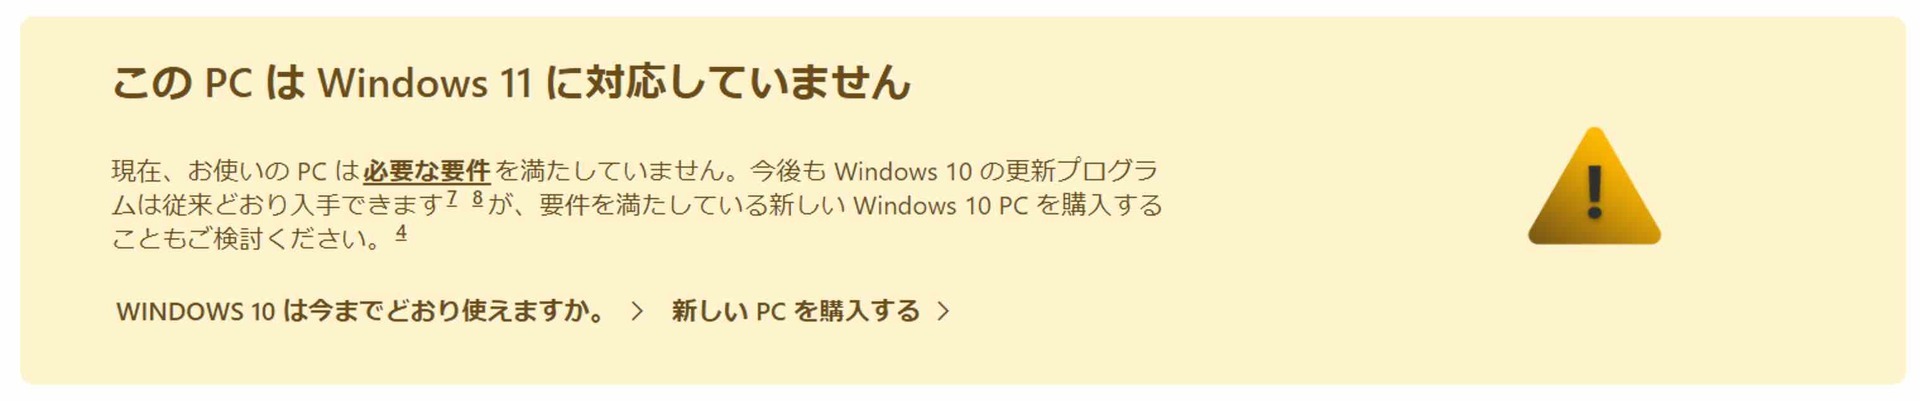 paralells16-windows11-not-supported-web.jpg